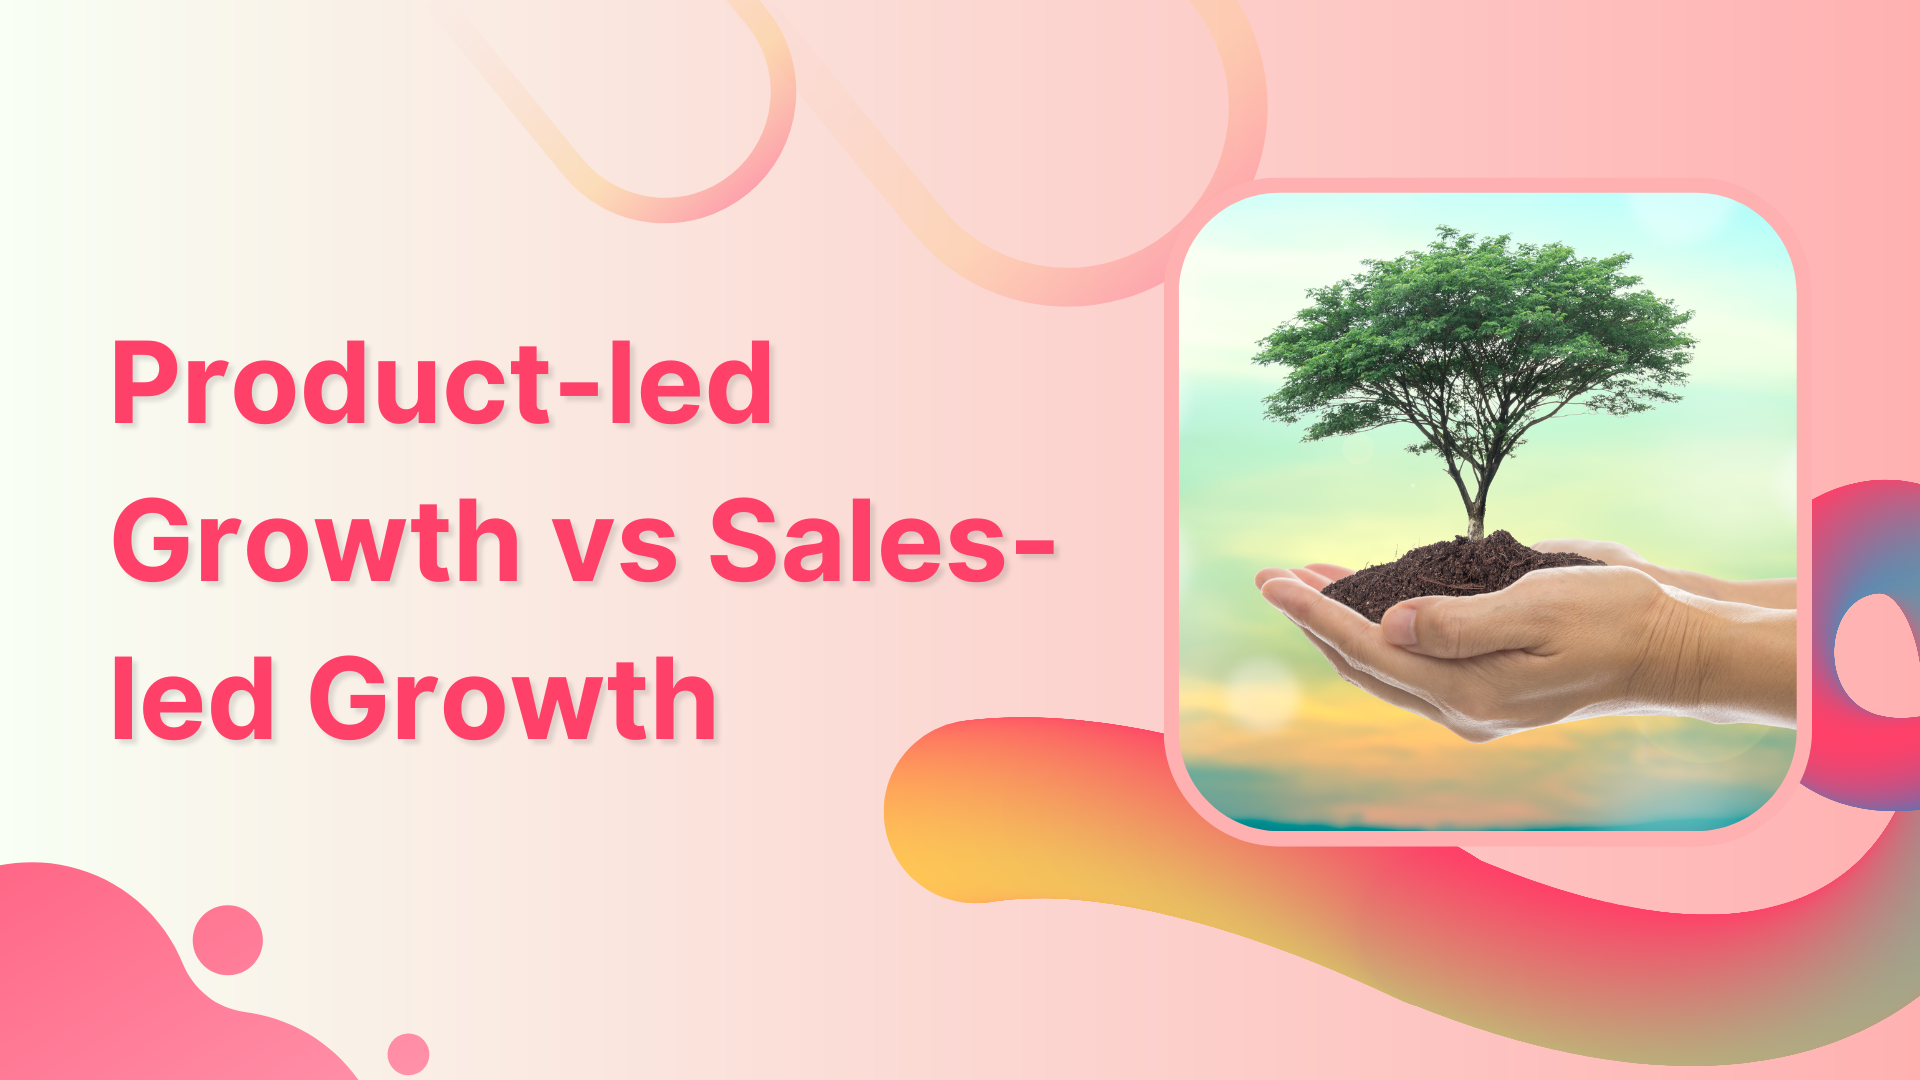 Product-led Growth vs Sales-led Growth